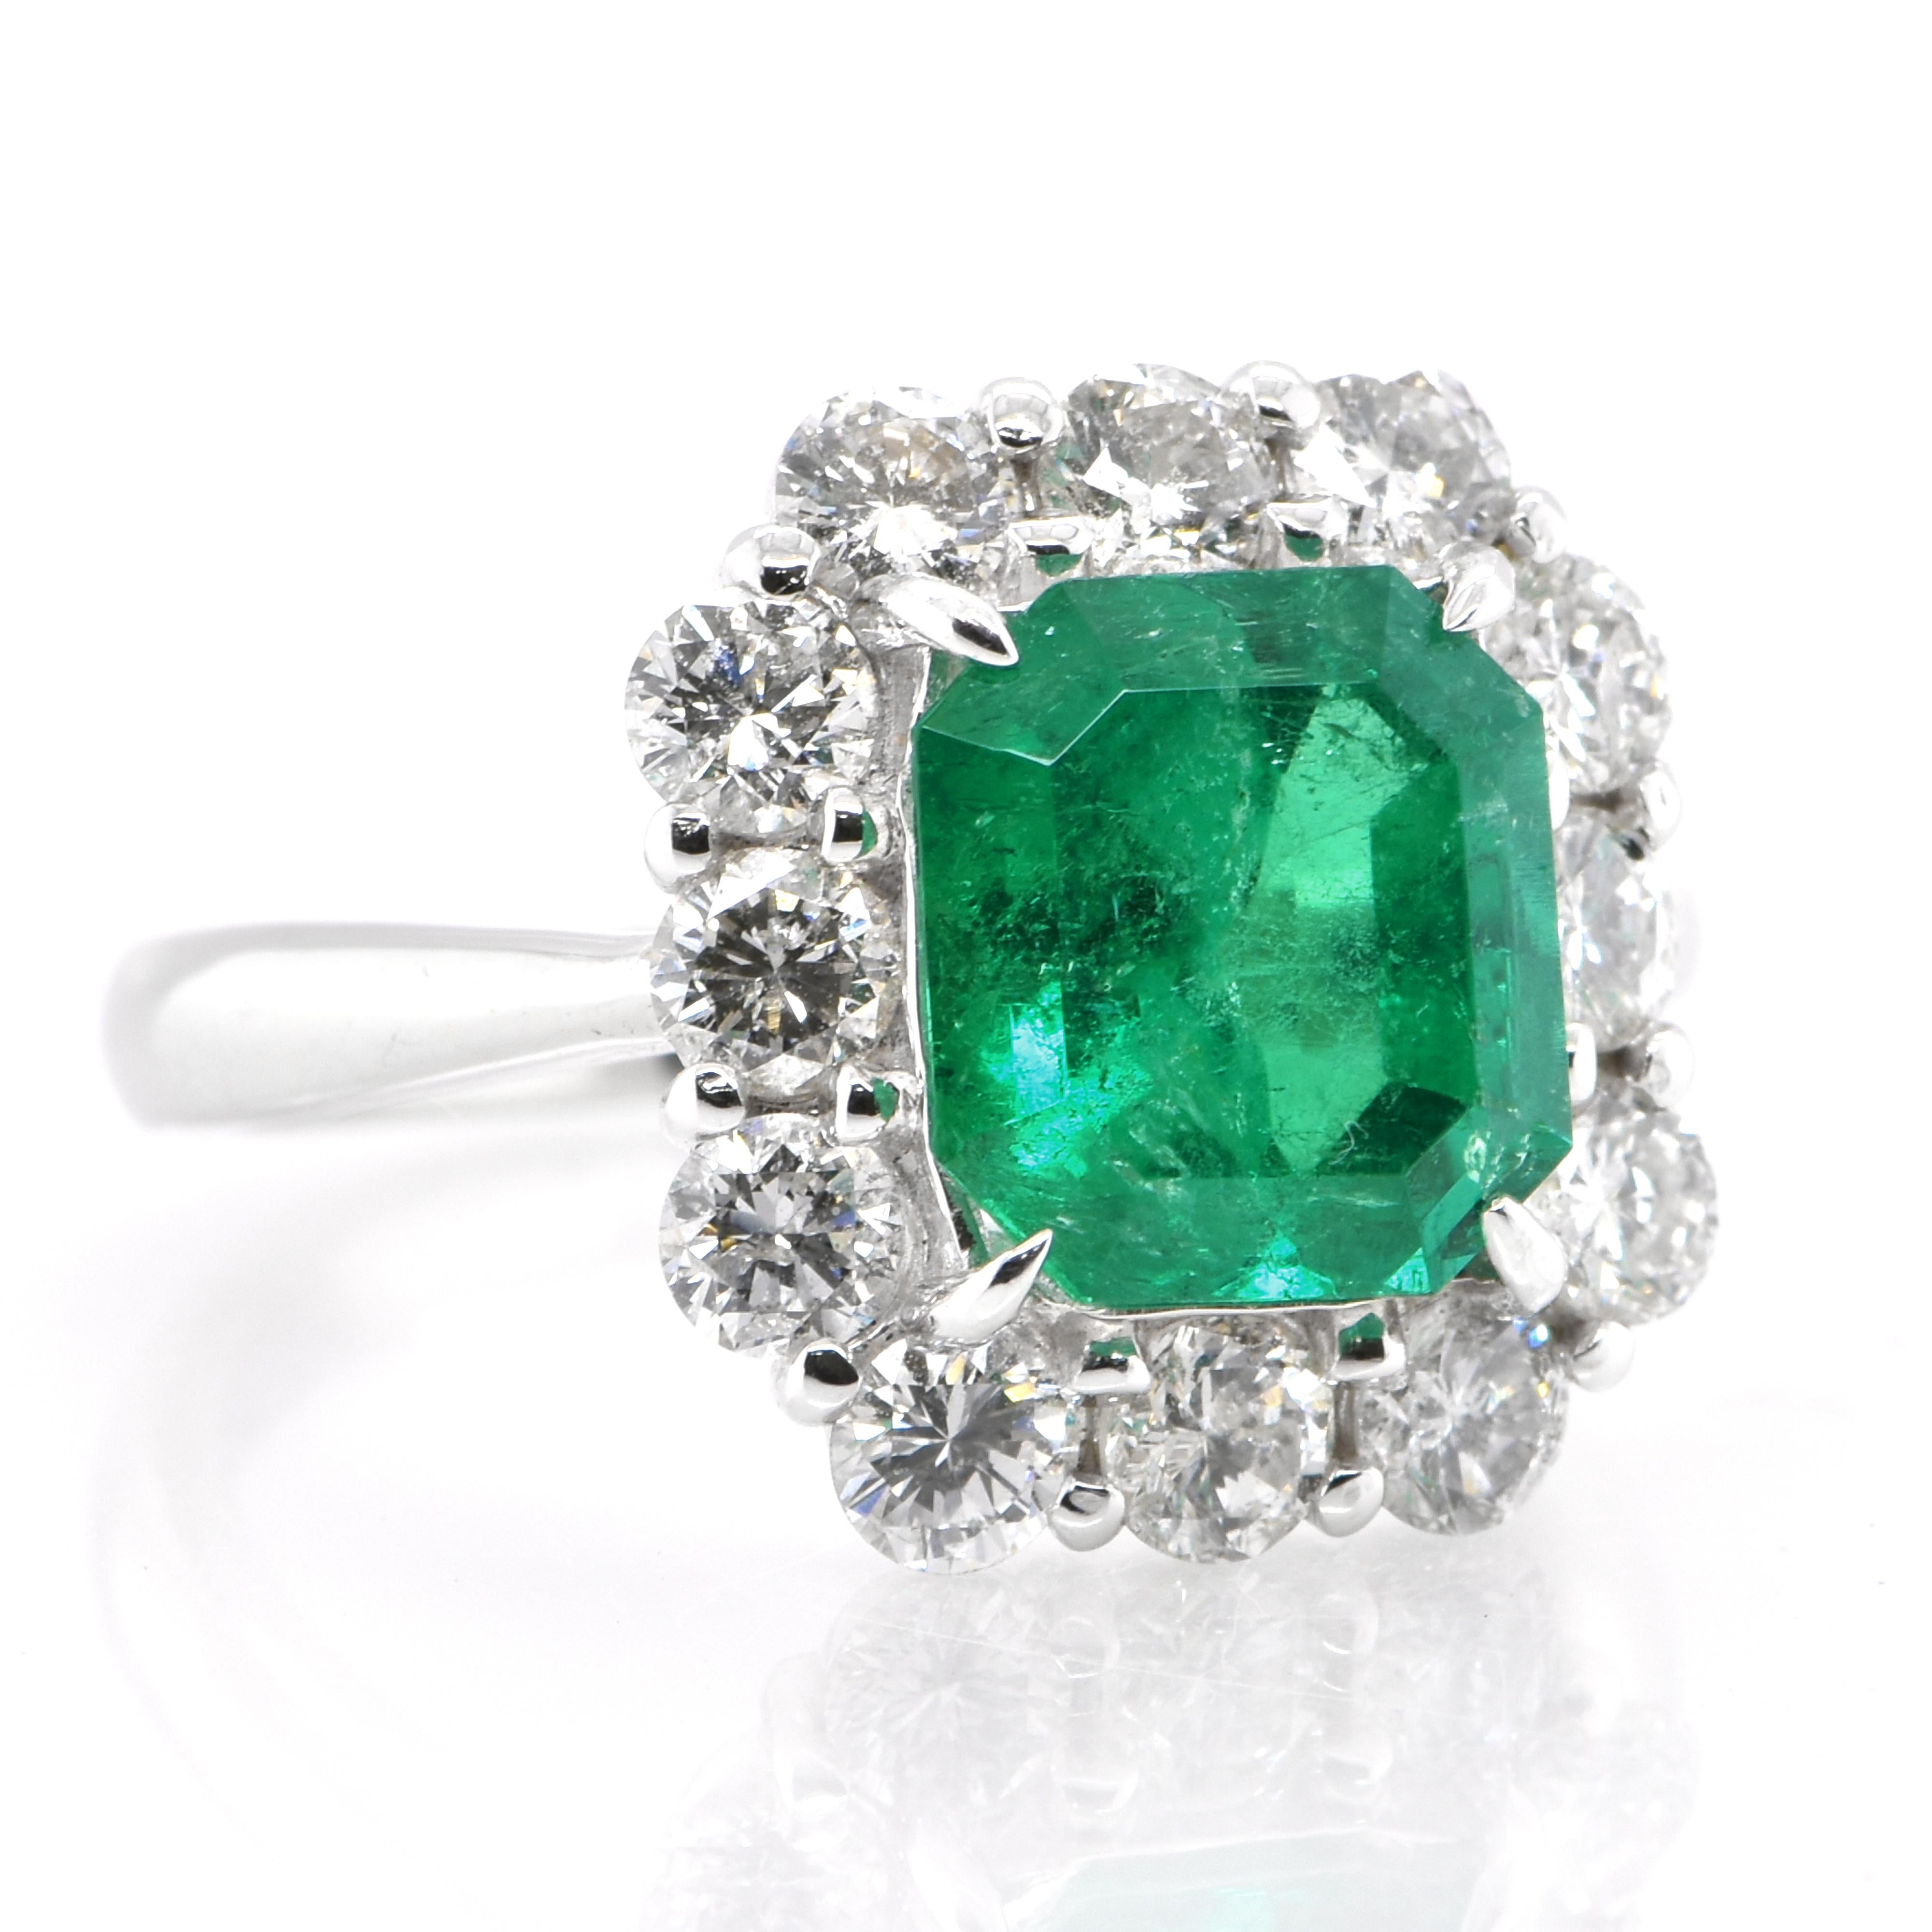 Modern GIA Certified 2.73 Carat Natural Colombian Emerald Diamond Ring Set in Platinum For Sale